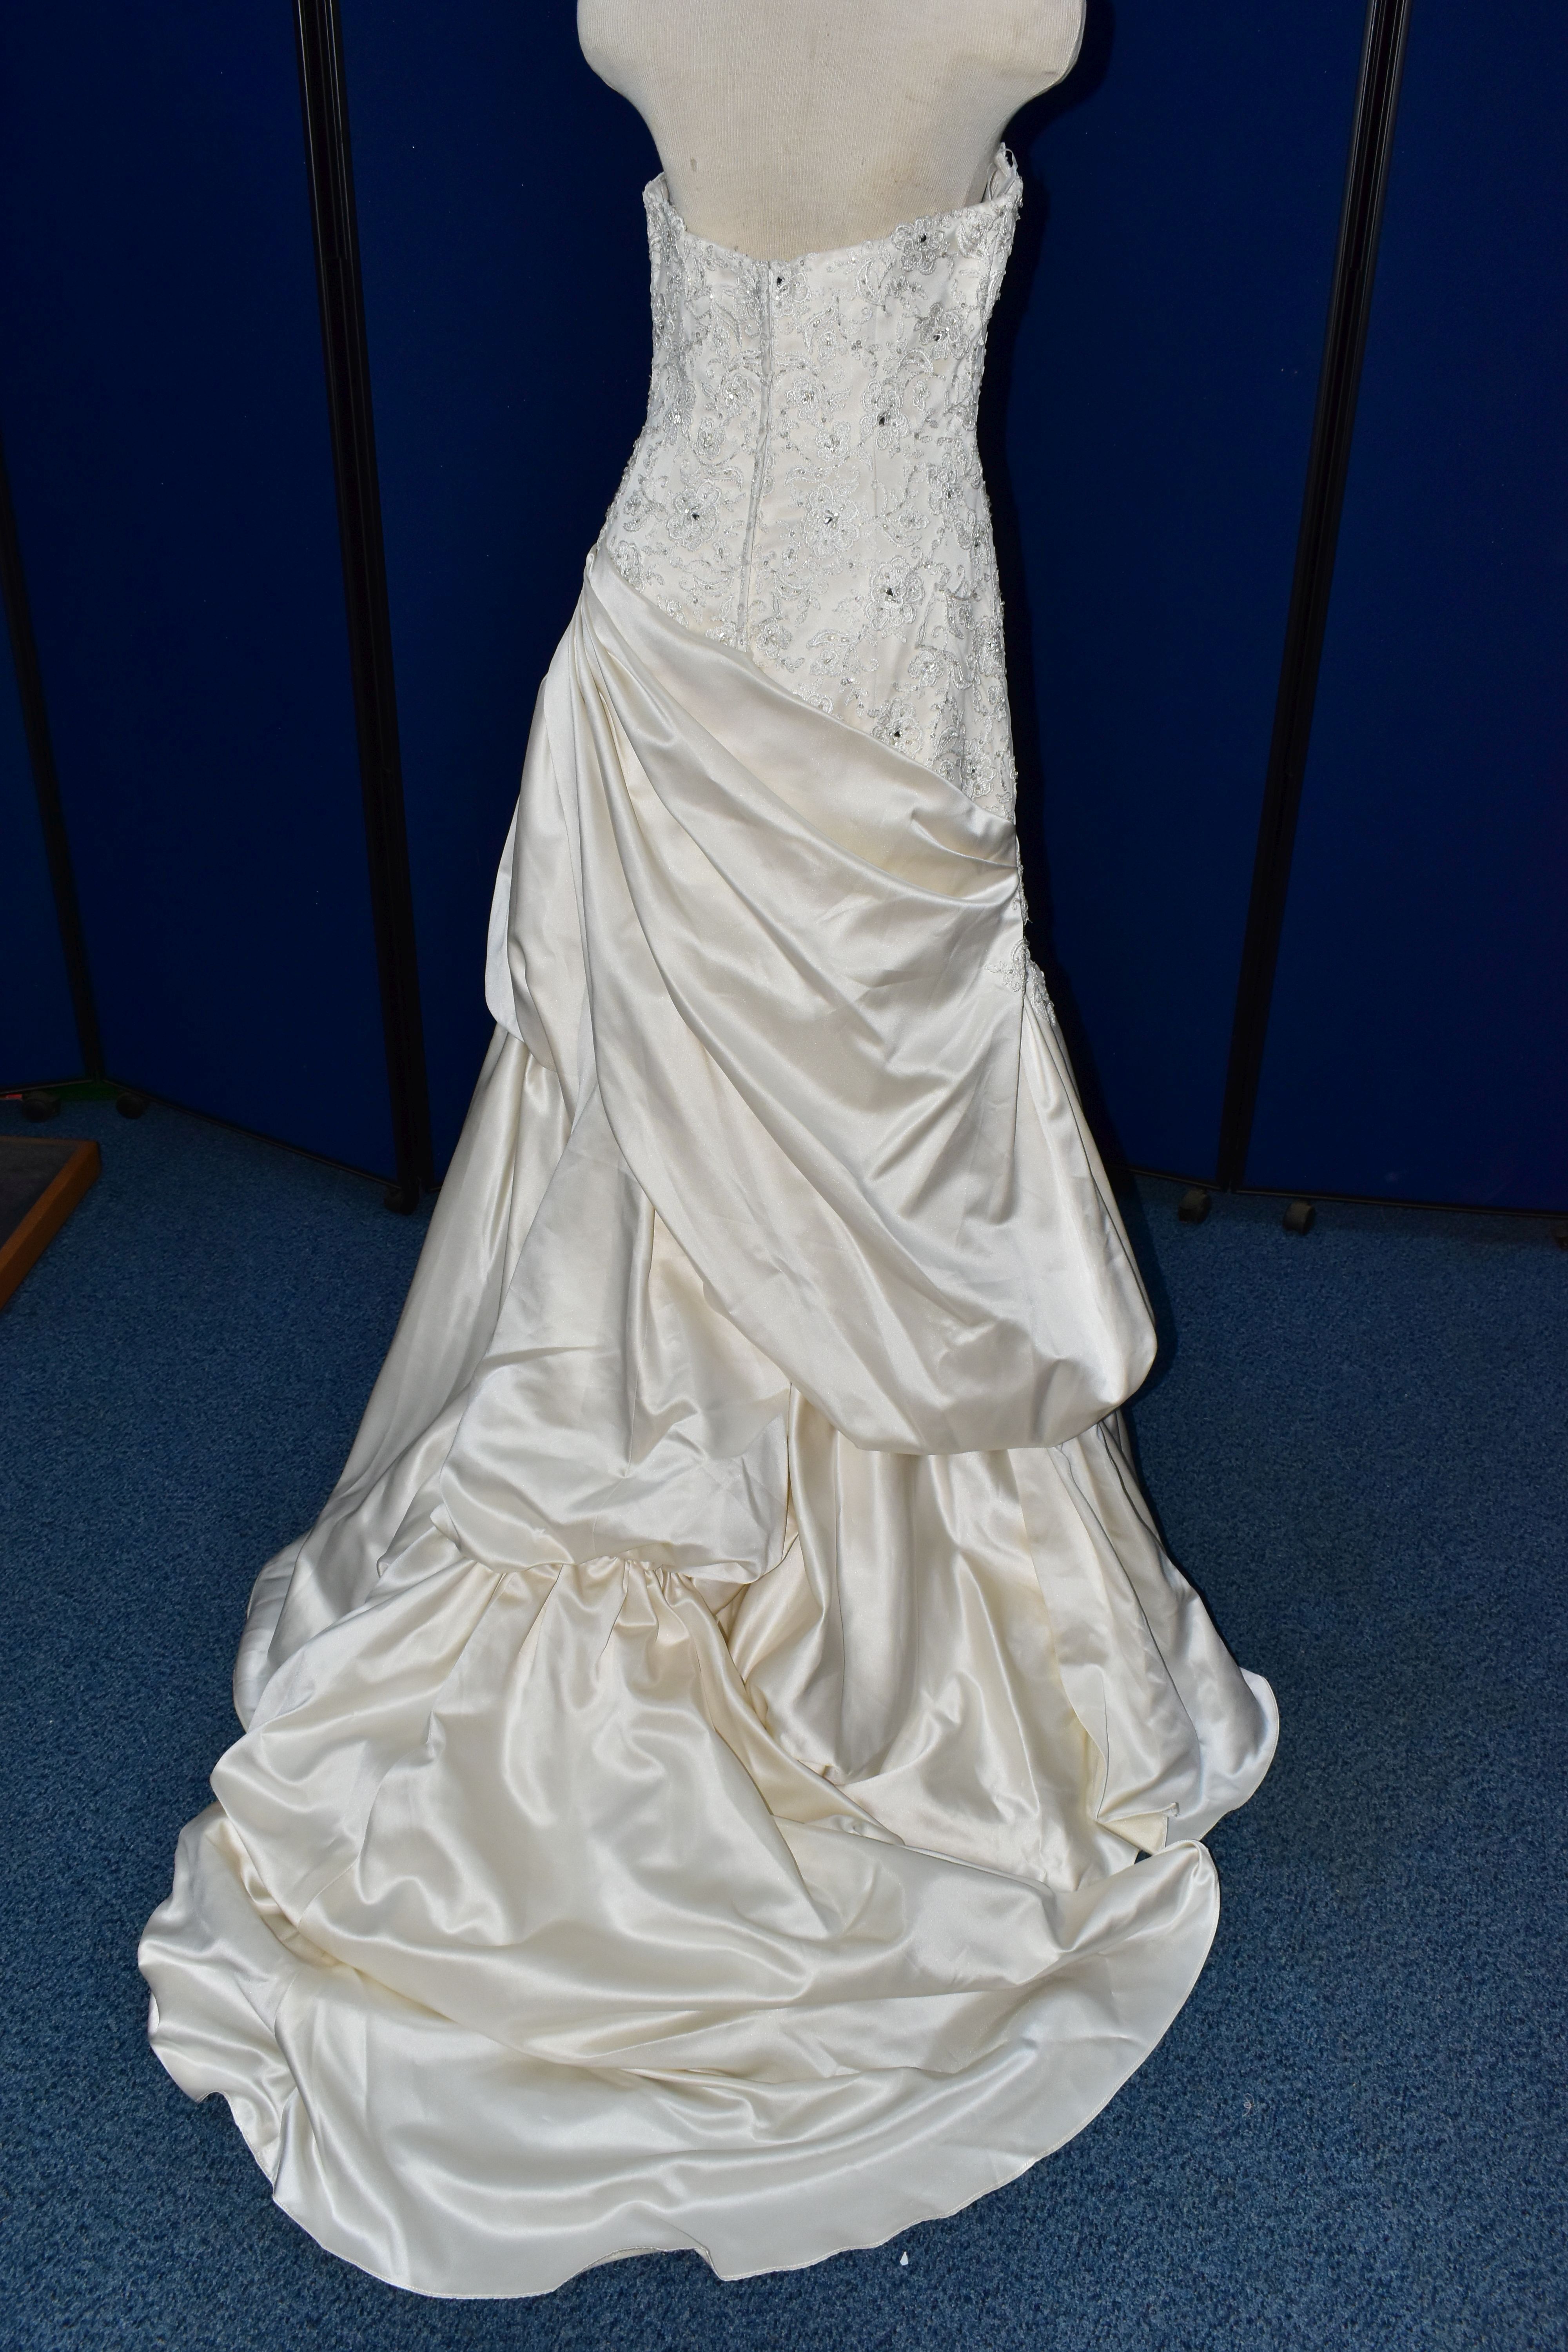 WEDDING GOWN, champagne, size 10/12, satin with beaded appliques, gathered satin skirt (1) - Image 11 of 13